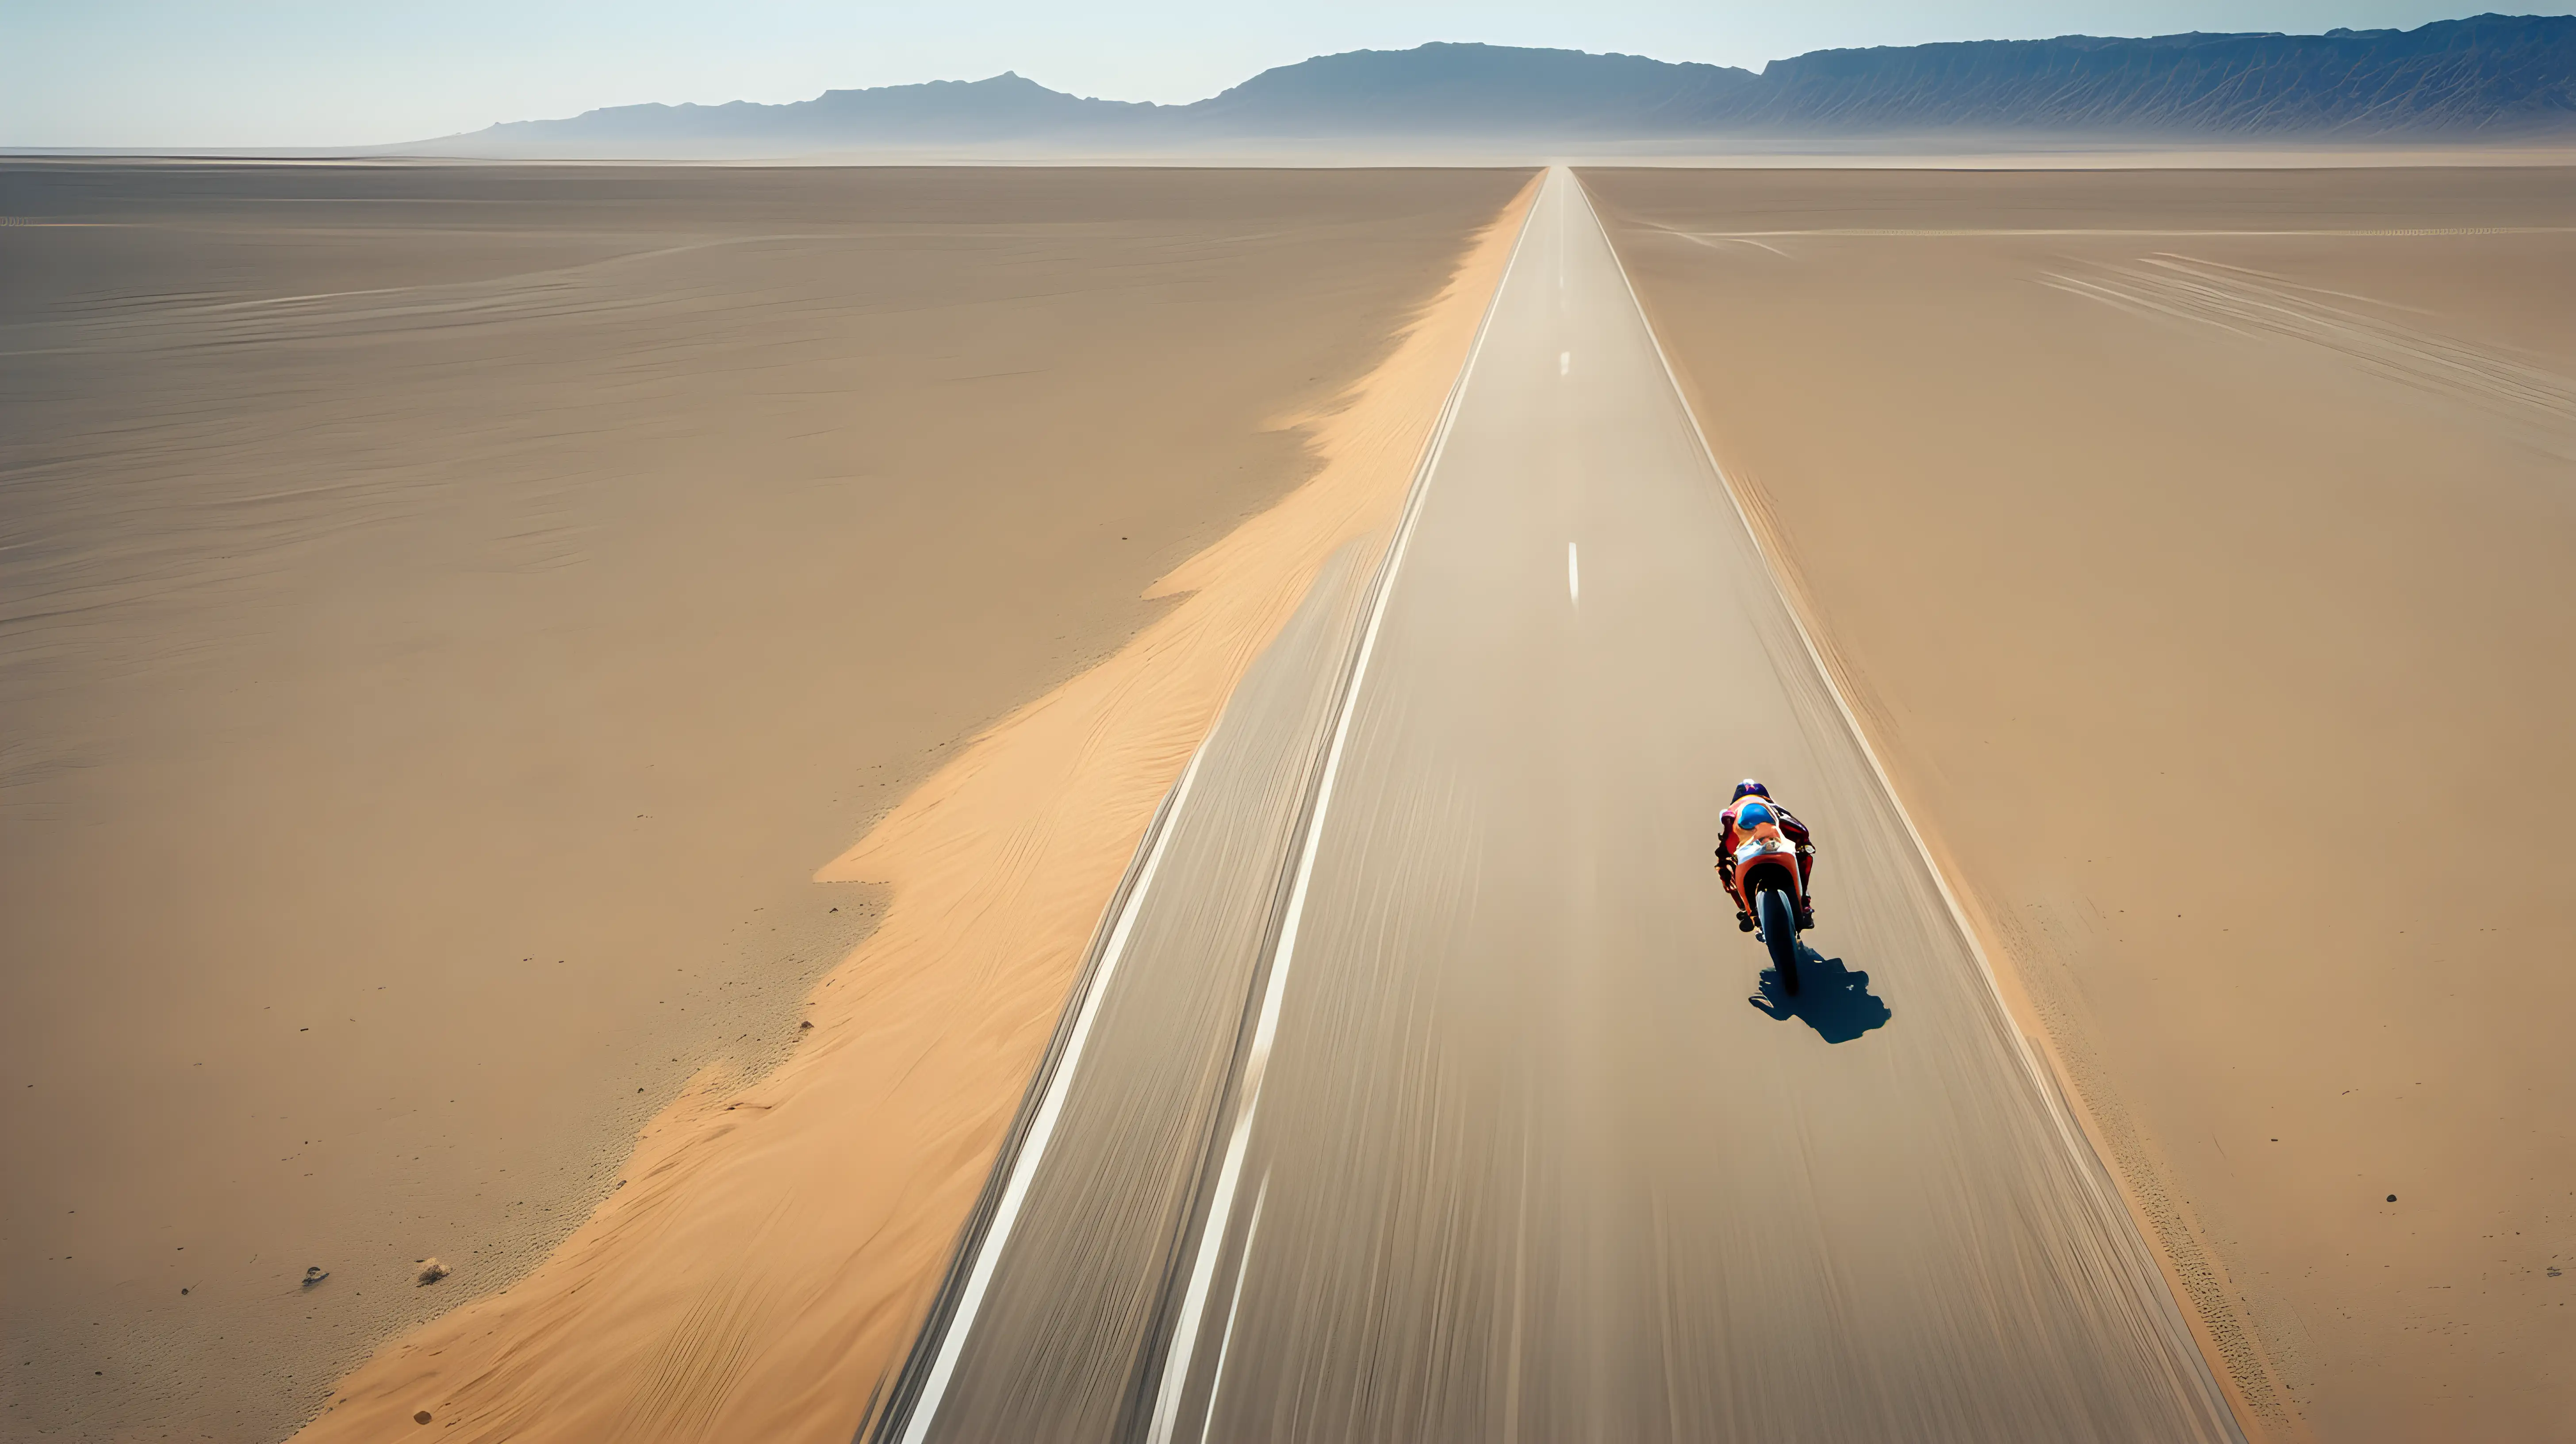 HighSpeed Desert Motorcycle Racing with Colorful Rider